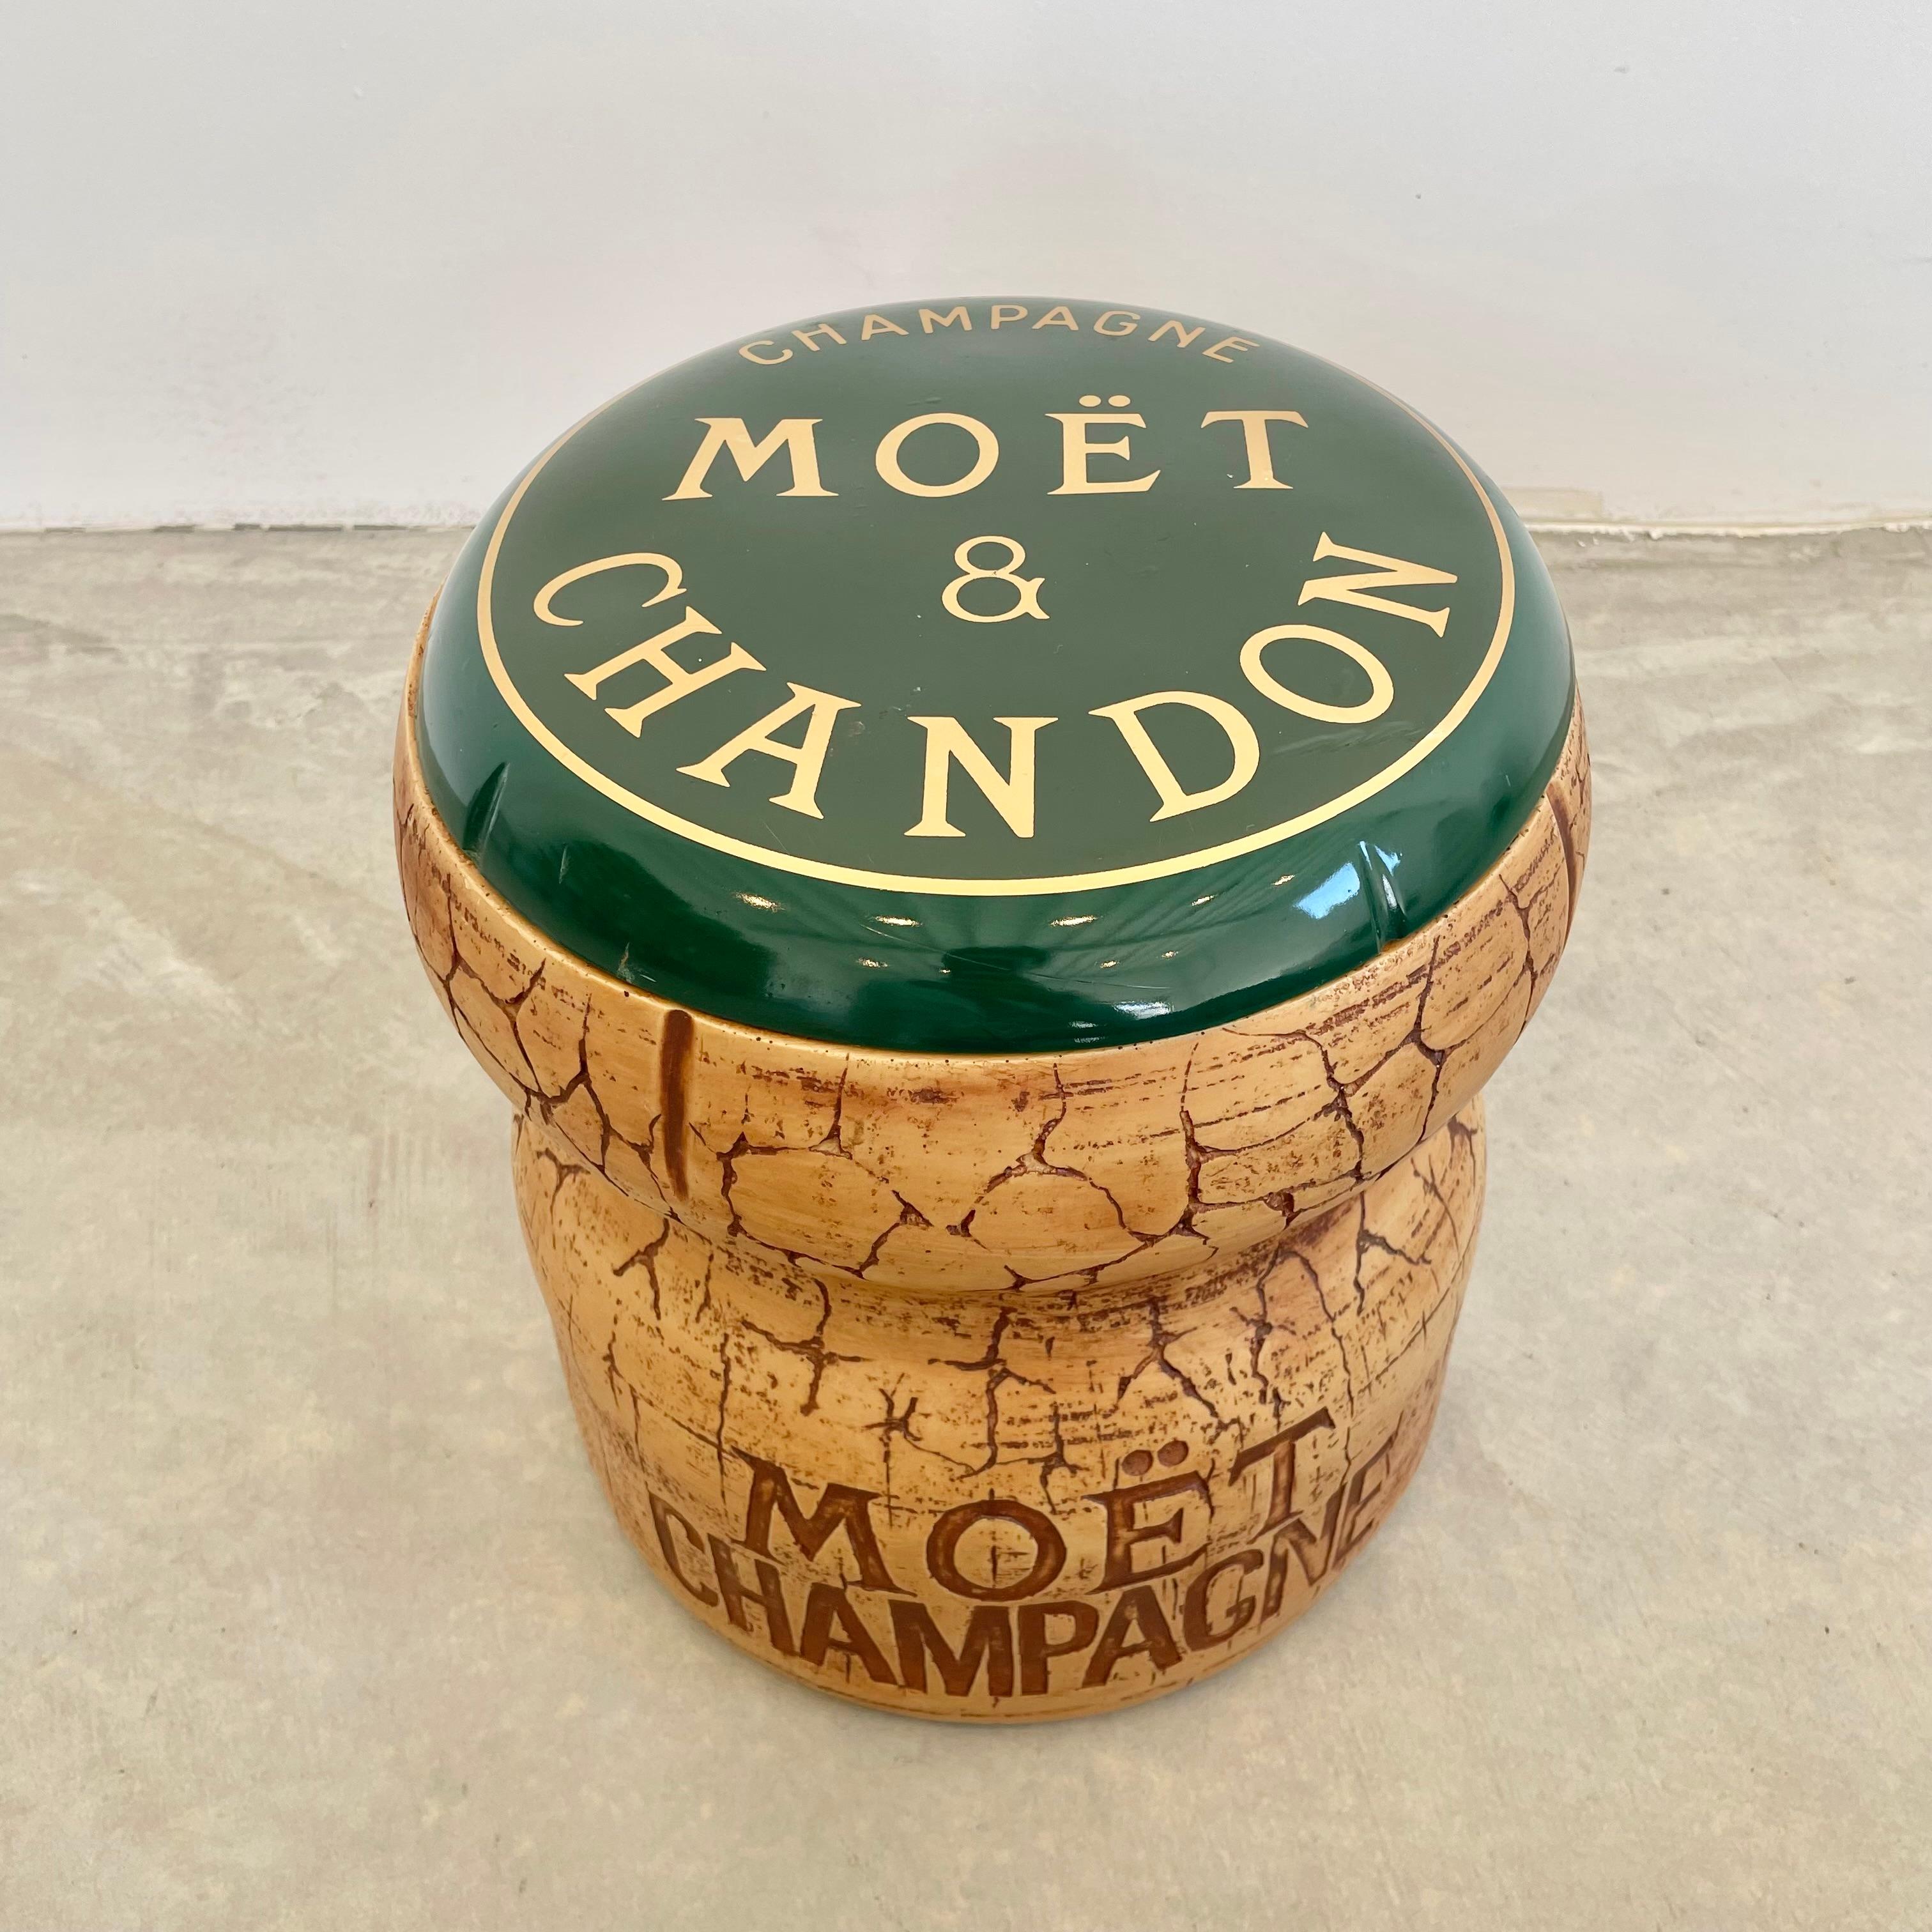 Great pop-art champagne bucket/cooler by Think Big. Made in New York City, 1993 stamped on underside. In the shape of champagne cork by Moet & Chandon. Made of heavy duty plastic and rubber. Inside of cooler has plastic bucket to hold water/ice.